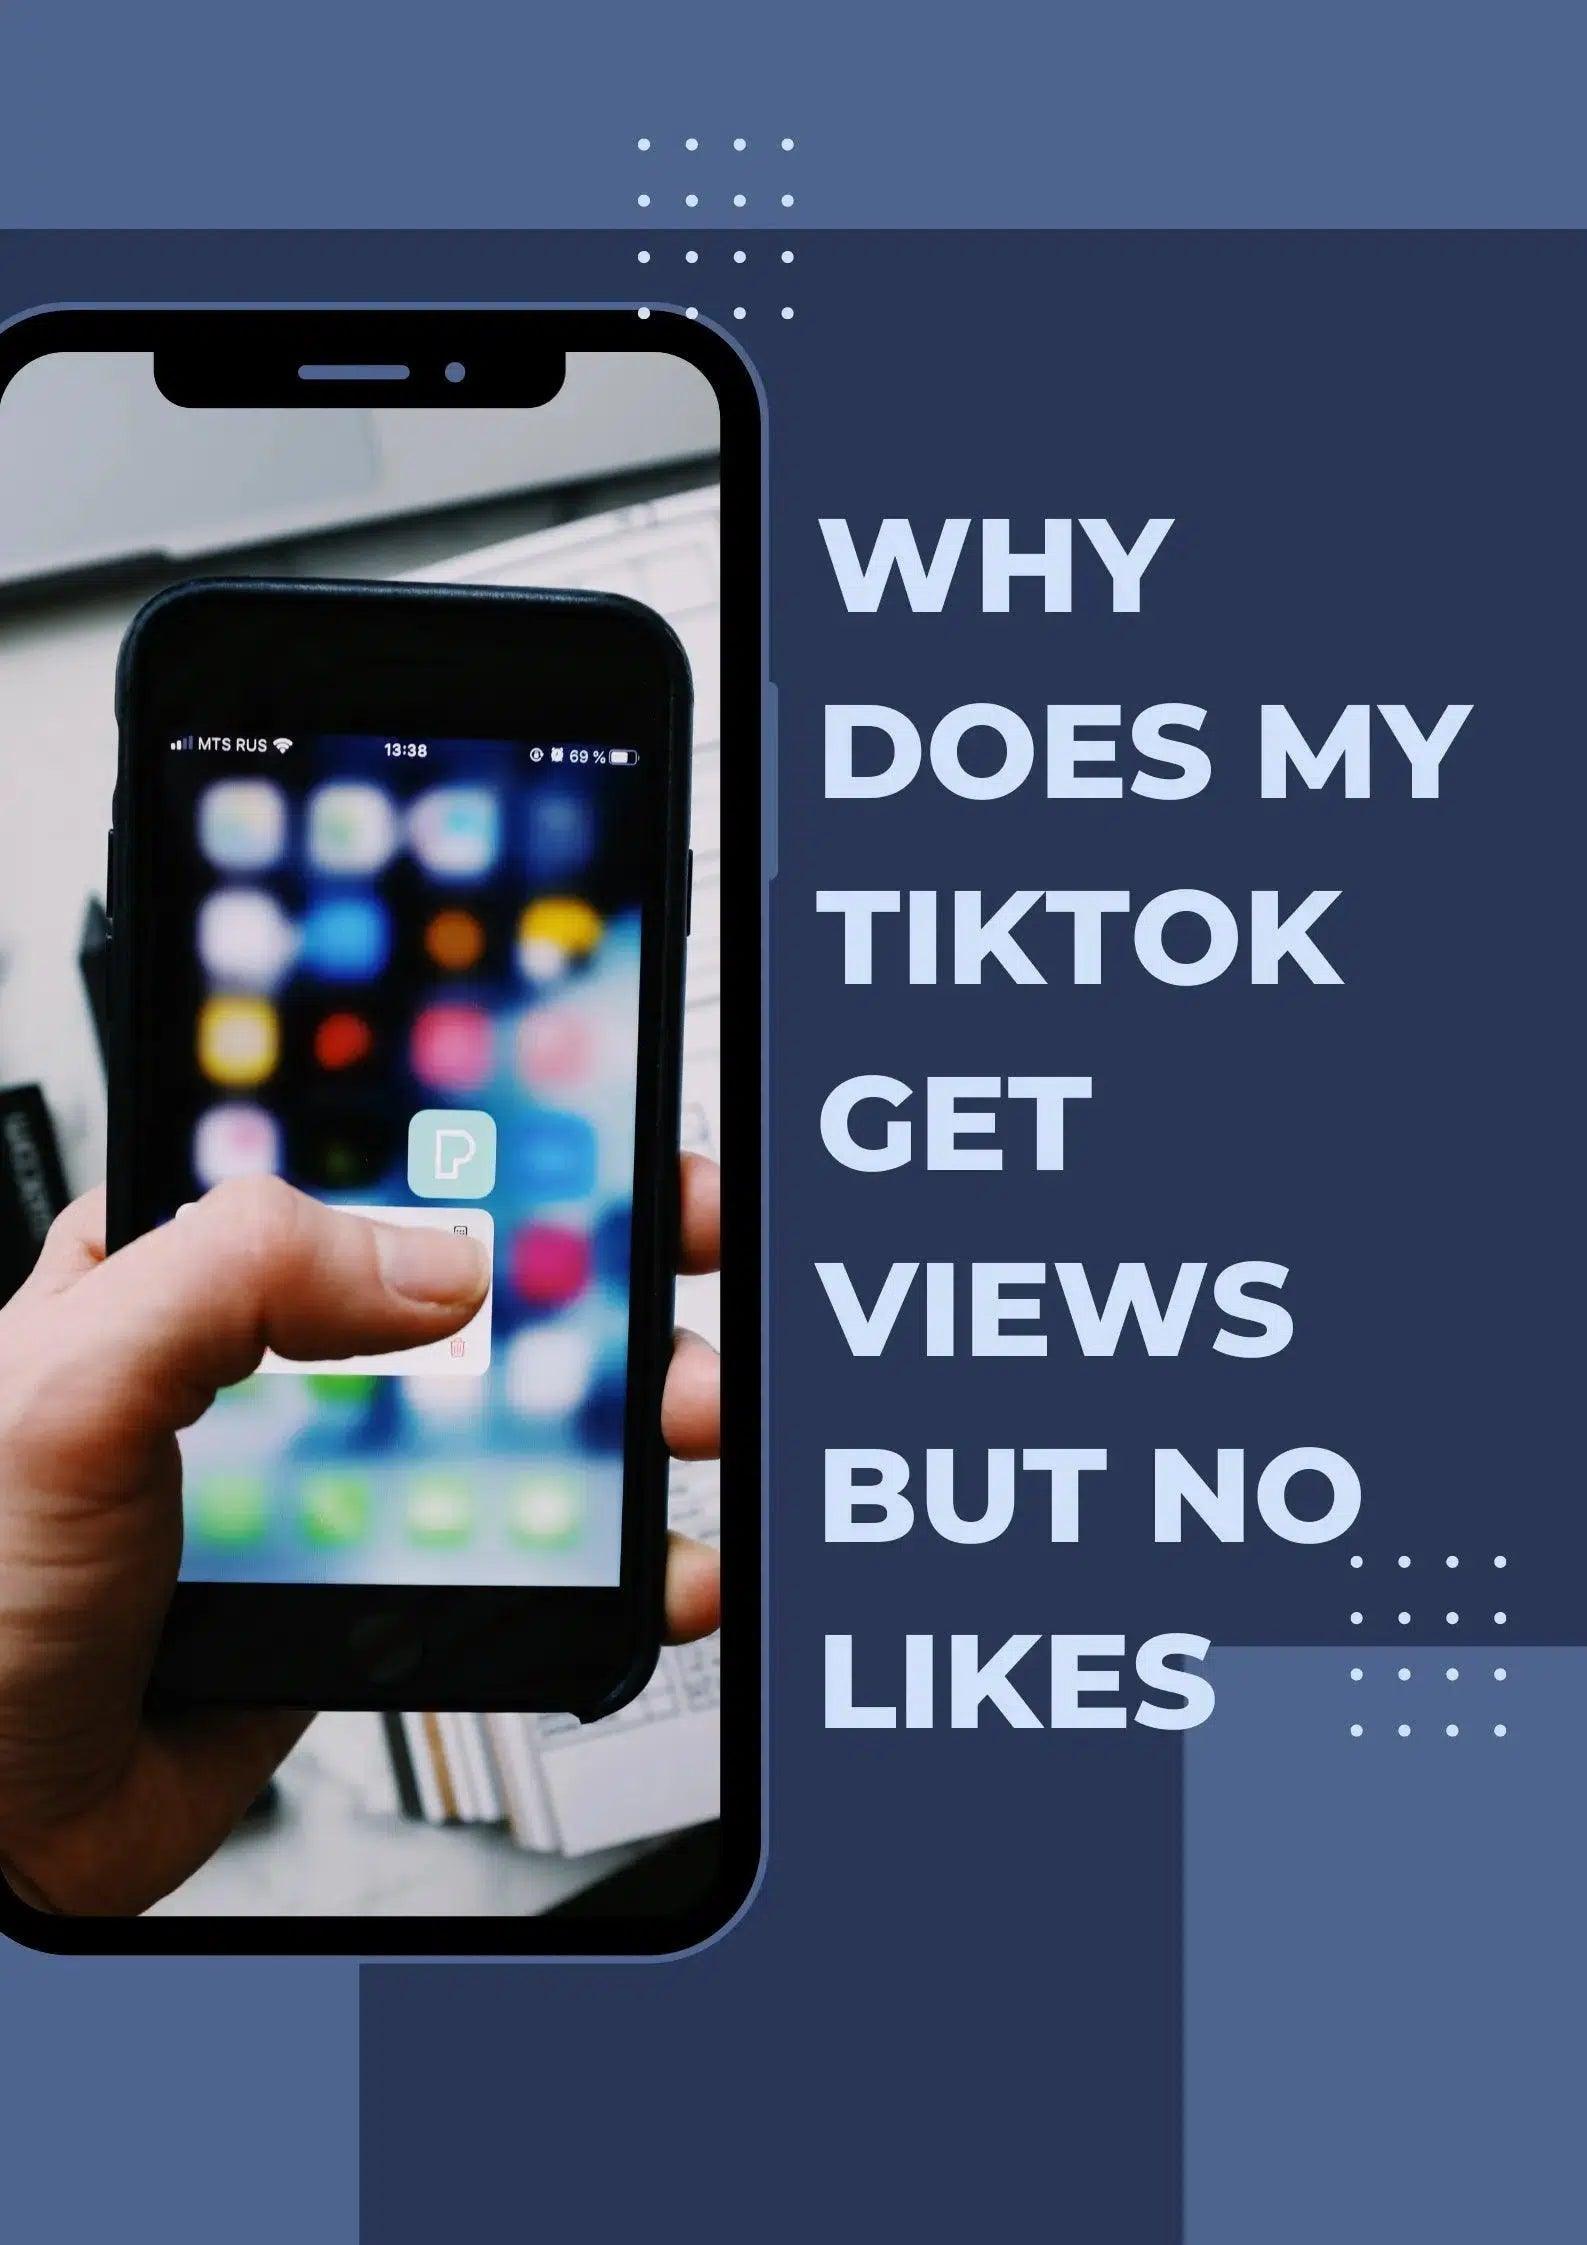 Is it common to get more follows than likes on TikTok? - Quora